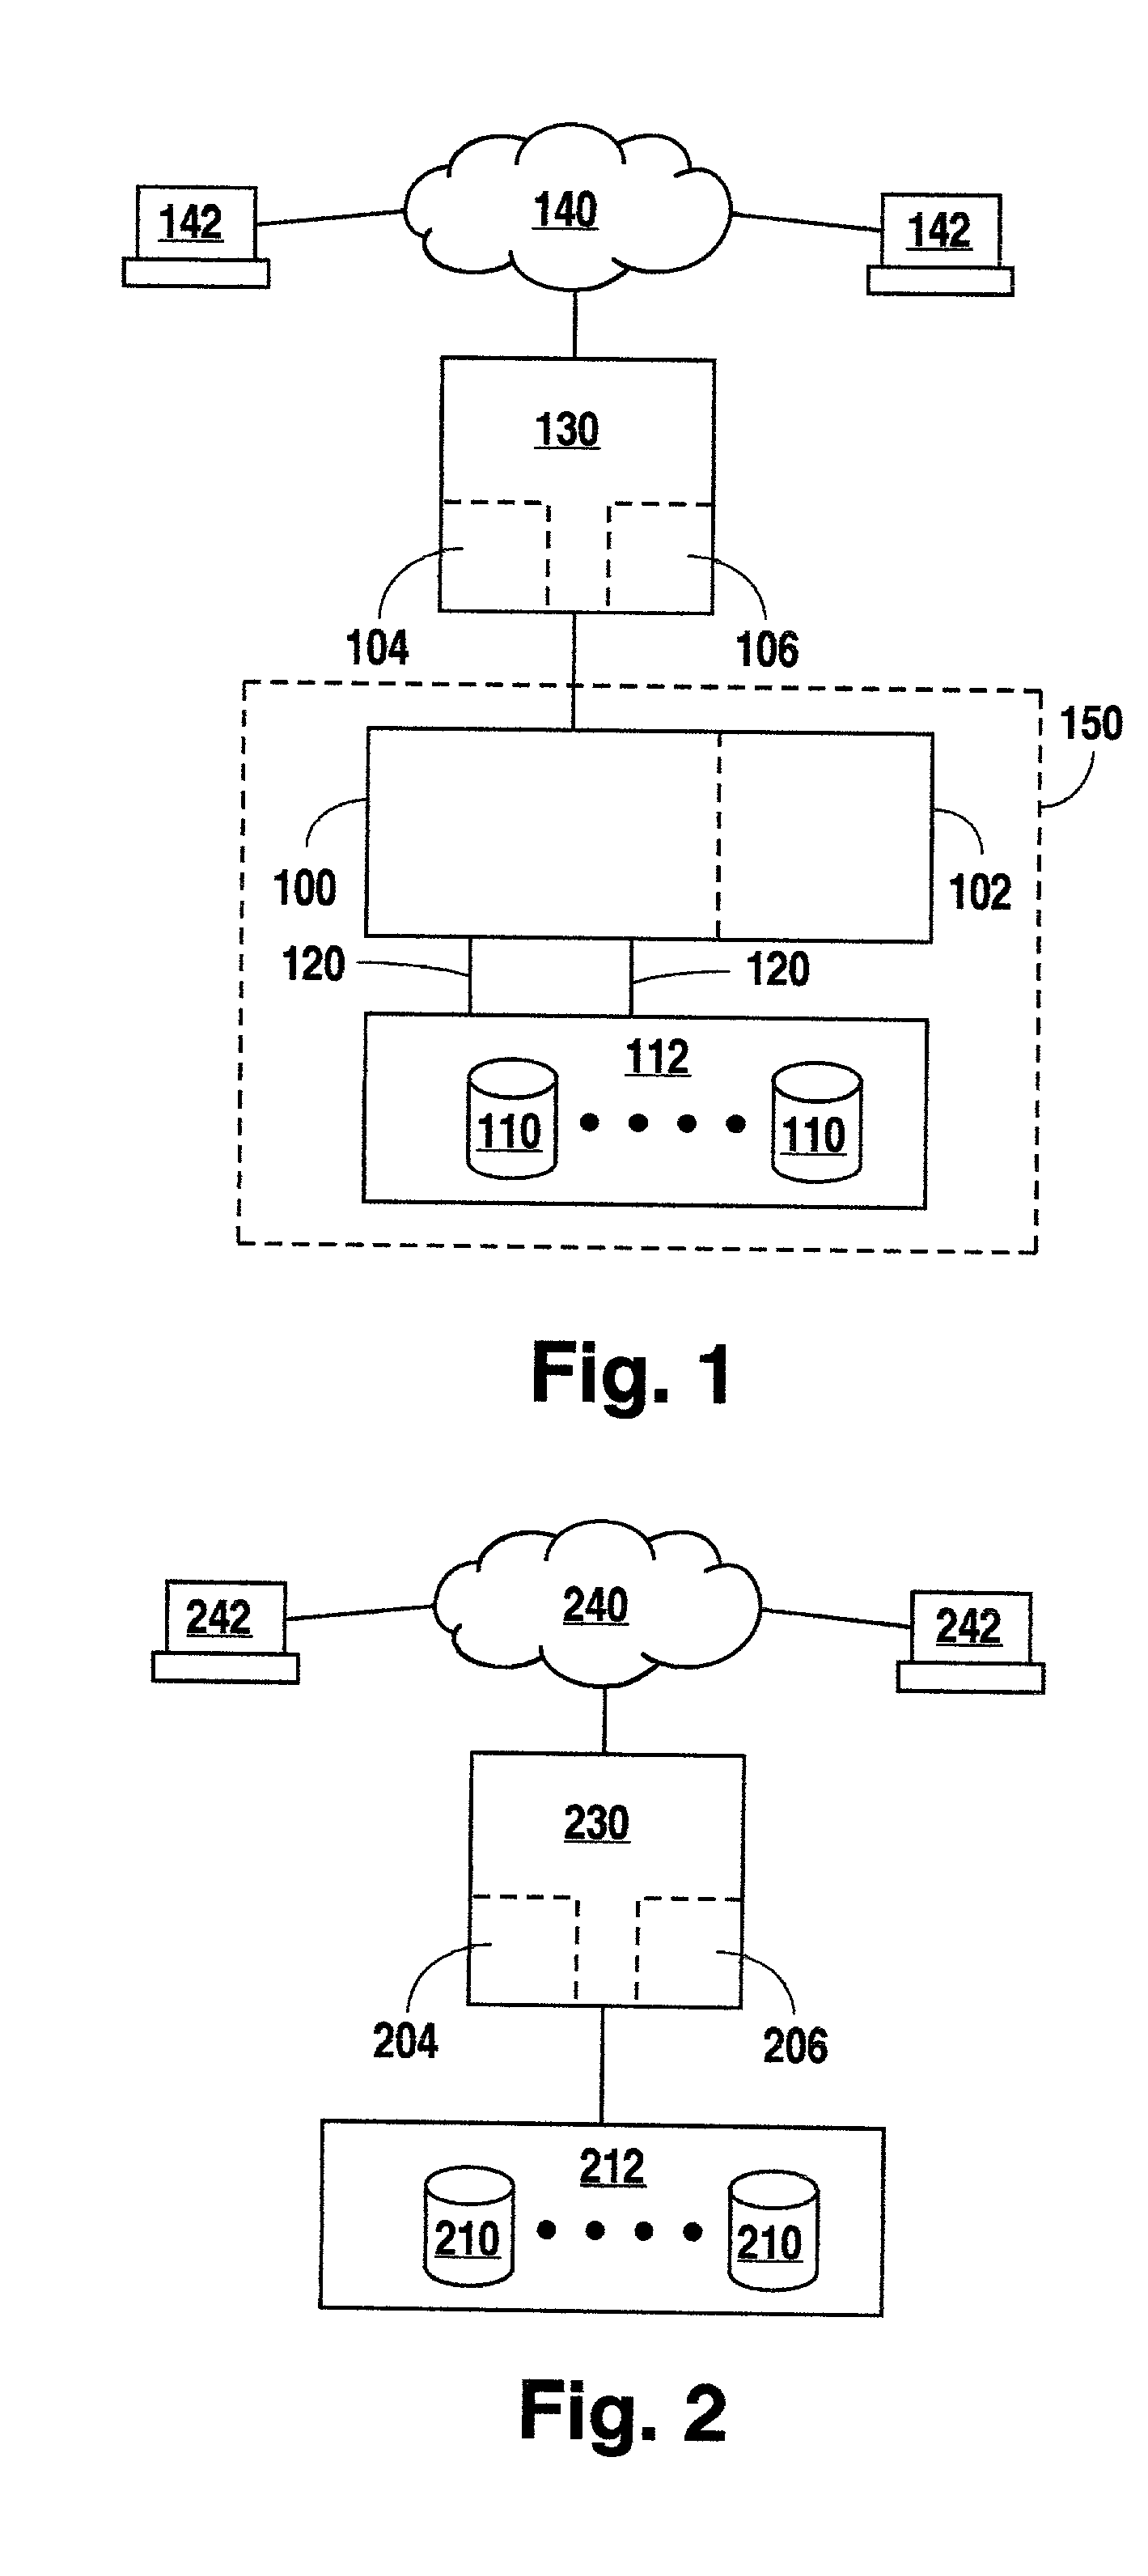 Systems and methods for intelligent information retrieval and delivery in an information management environment